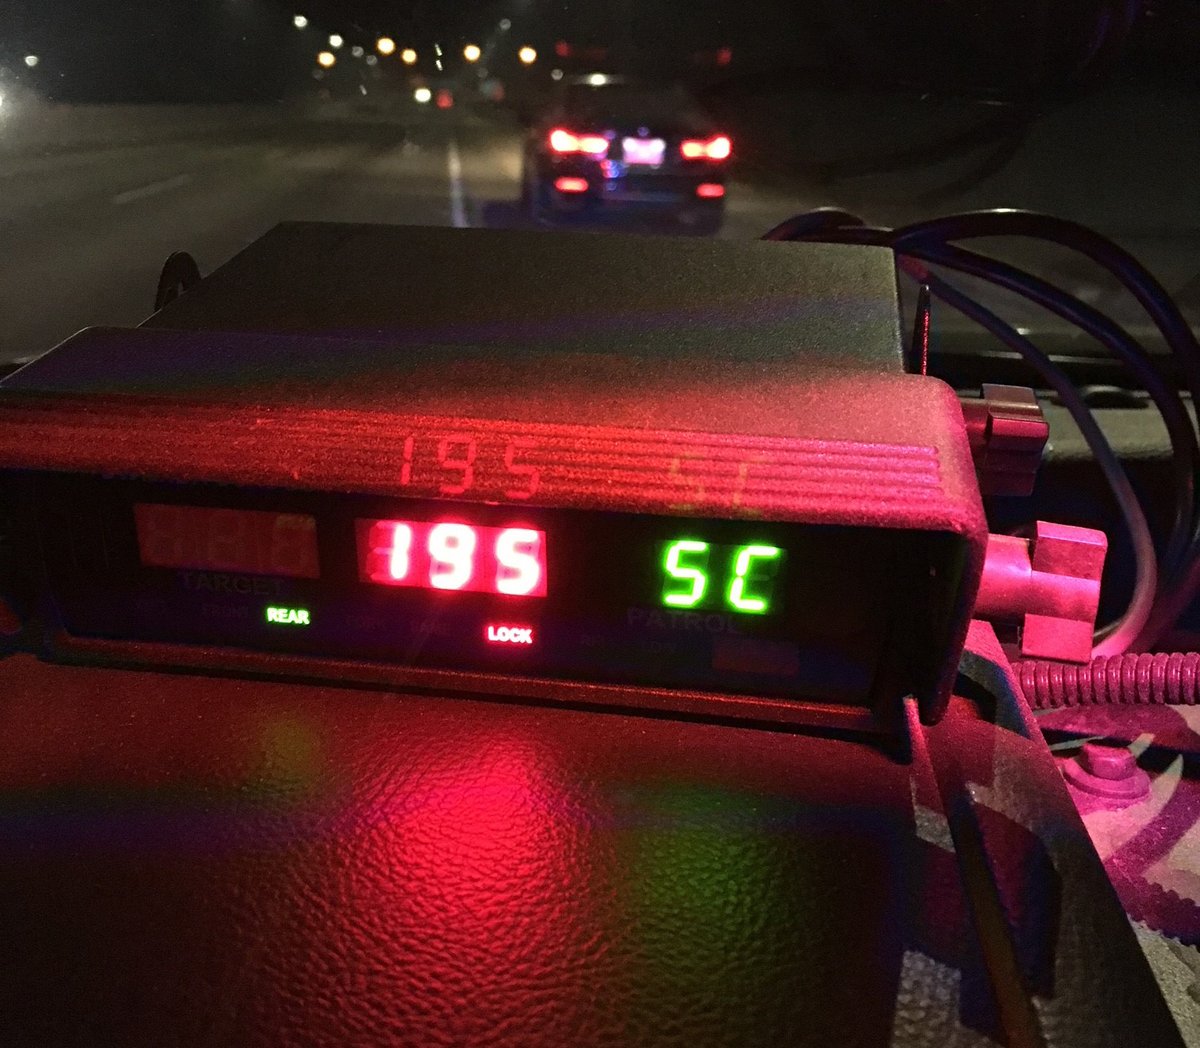 Mounties shared this photo of radar equipment nailing a driver for going 195 km/h.